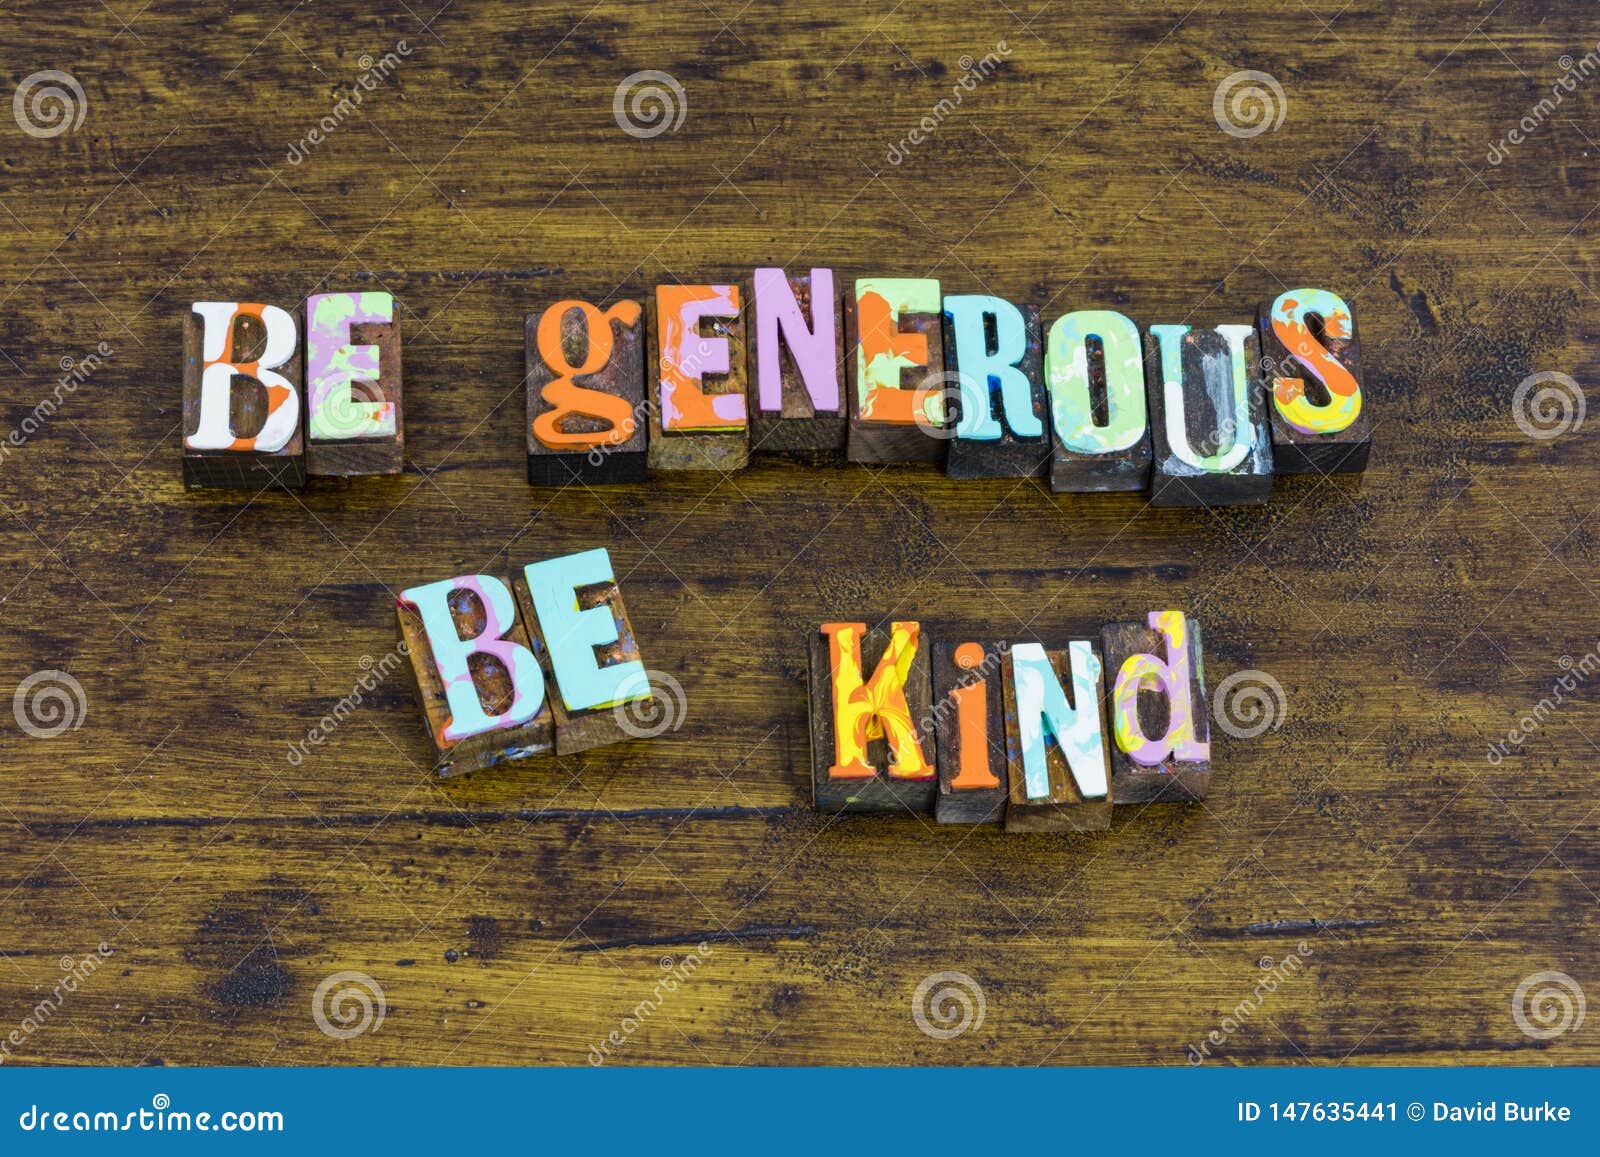 be generous kind grateful charity help goodness nice donate